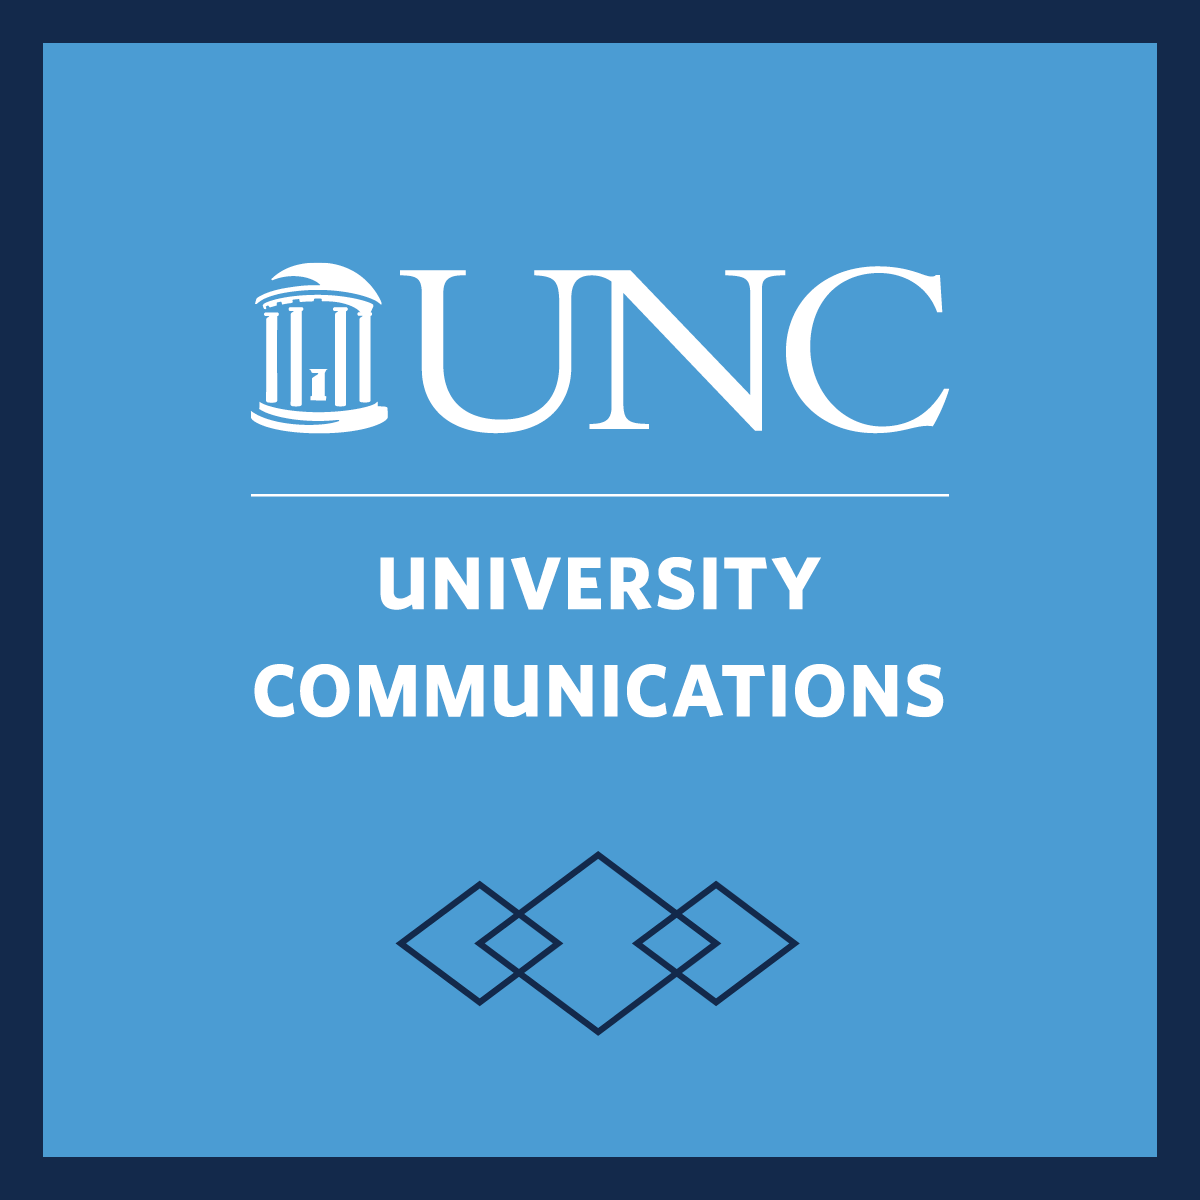 Carolina Blue square with navy blue outline that has a white University Communications logo and navy overlapping diamonds shape inside of it.